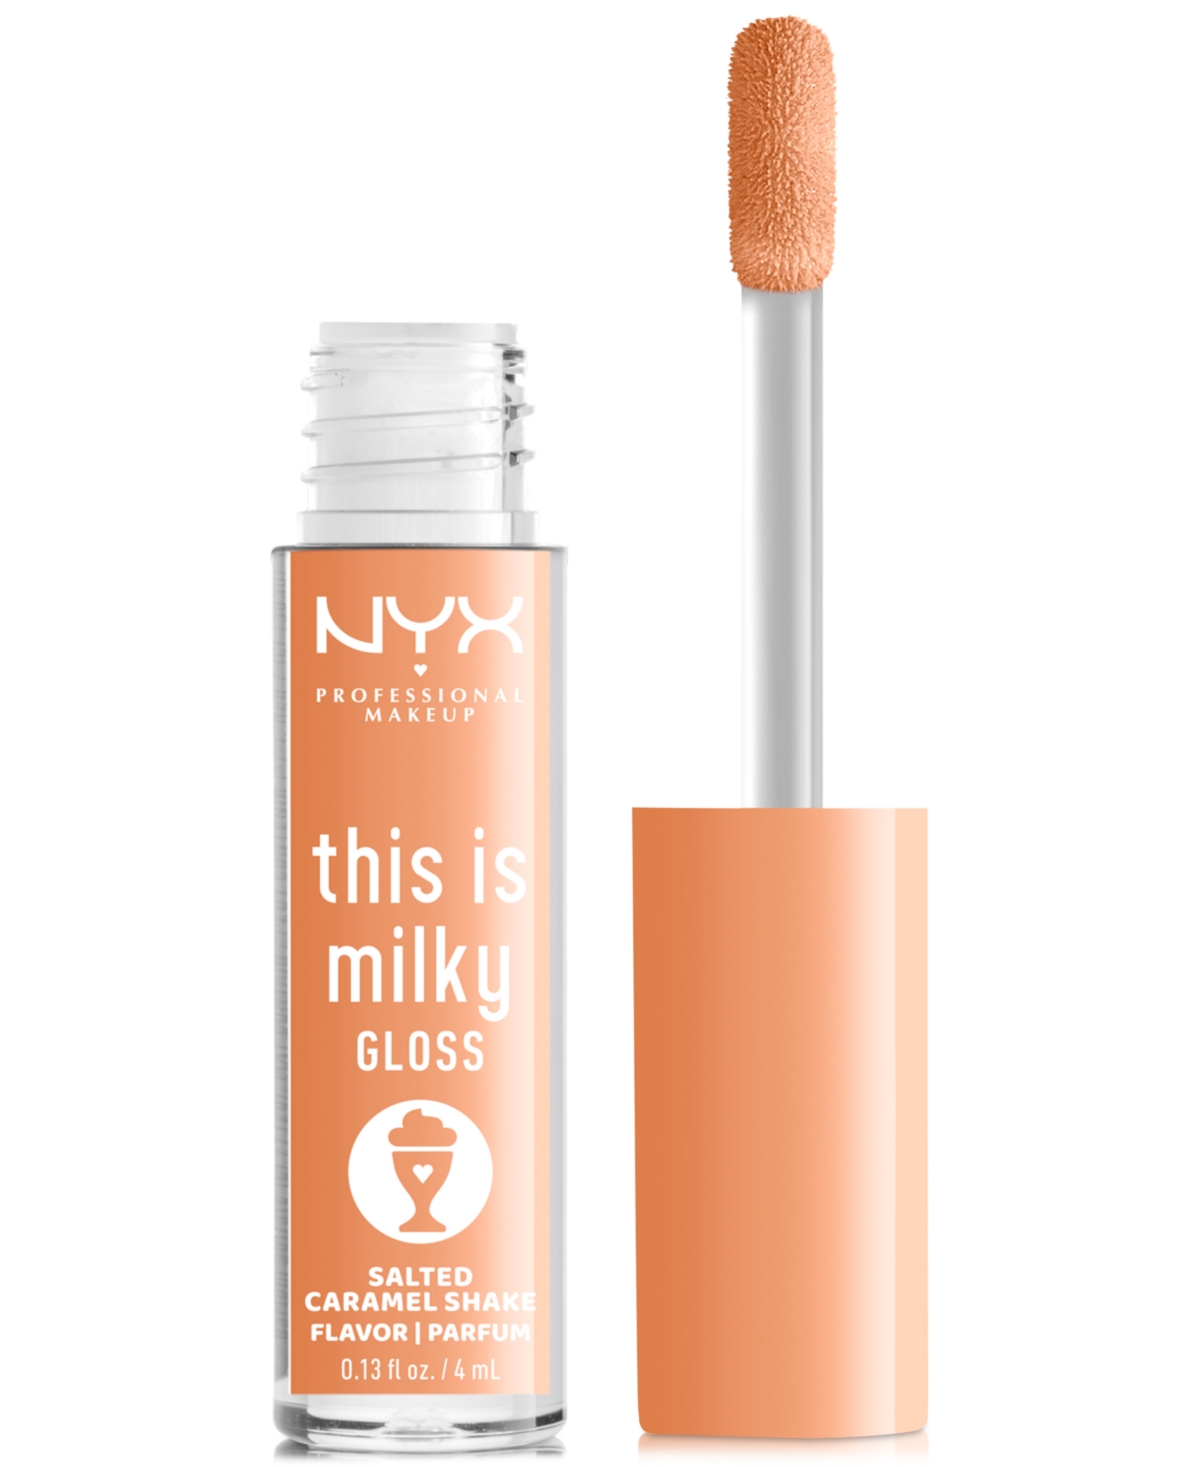 Nyx Professional Makeup This Is Milky Gloss In Salted Caramel Shake